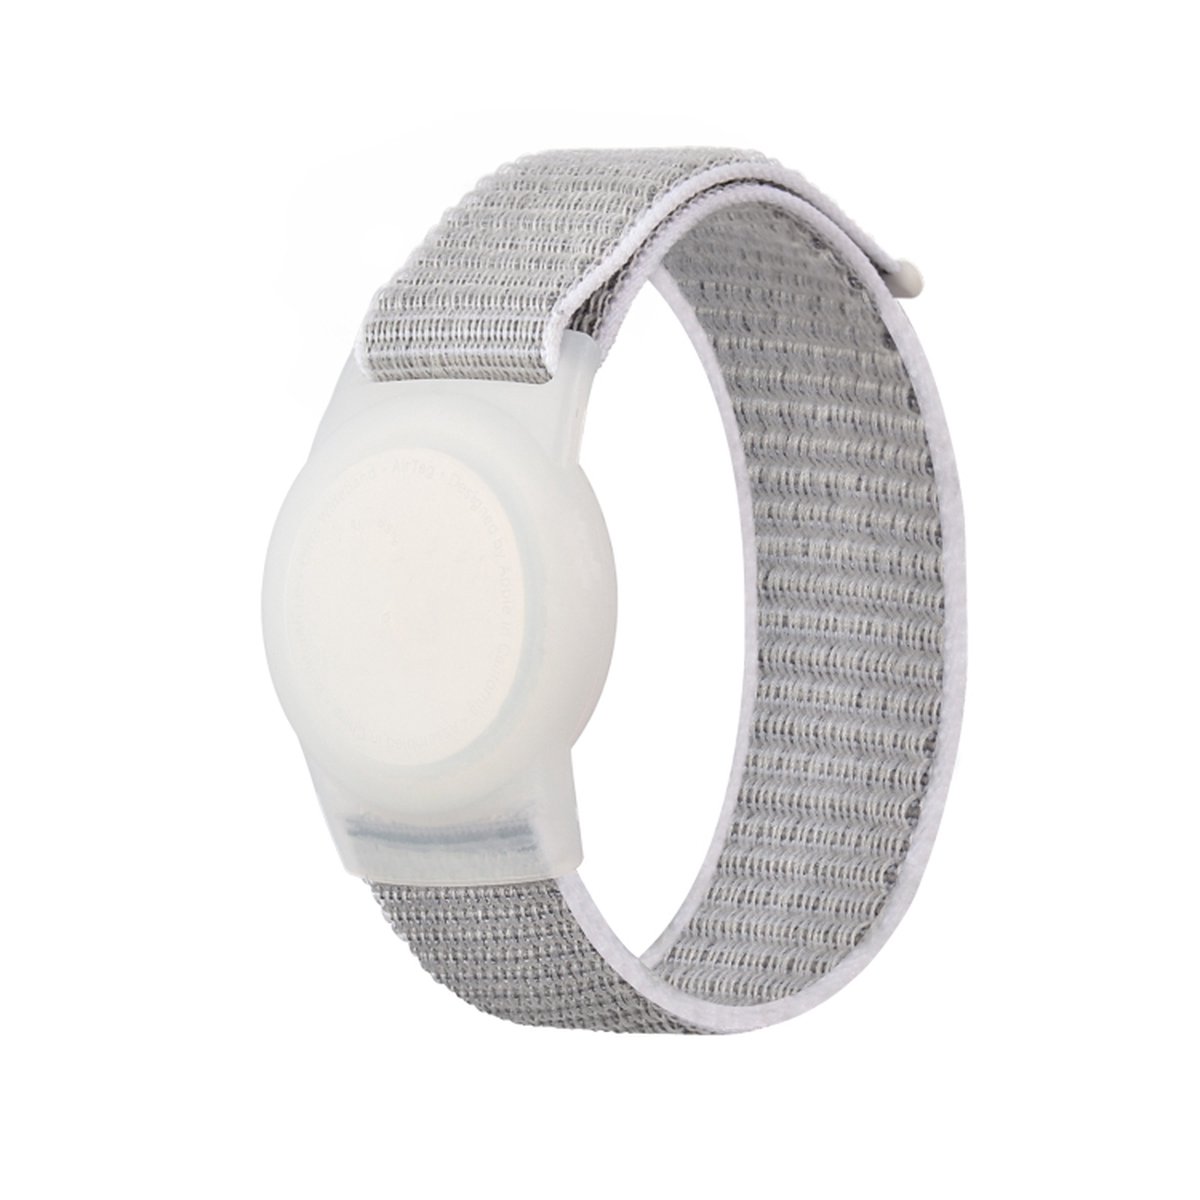 Airtag armband Polsband horloge - Airtag Sleutelhanger - Airtag Polsband Voor Kinderen - Airtag Armband - Airtag Apple - Klittenband - Airtag Houder - Airtag Hoesje - wit - grijs